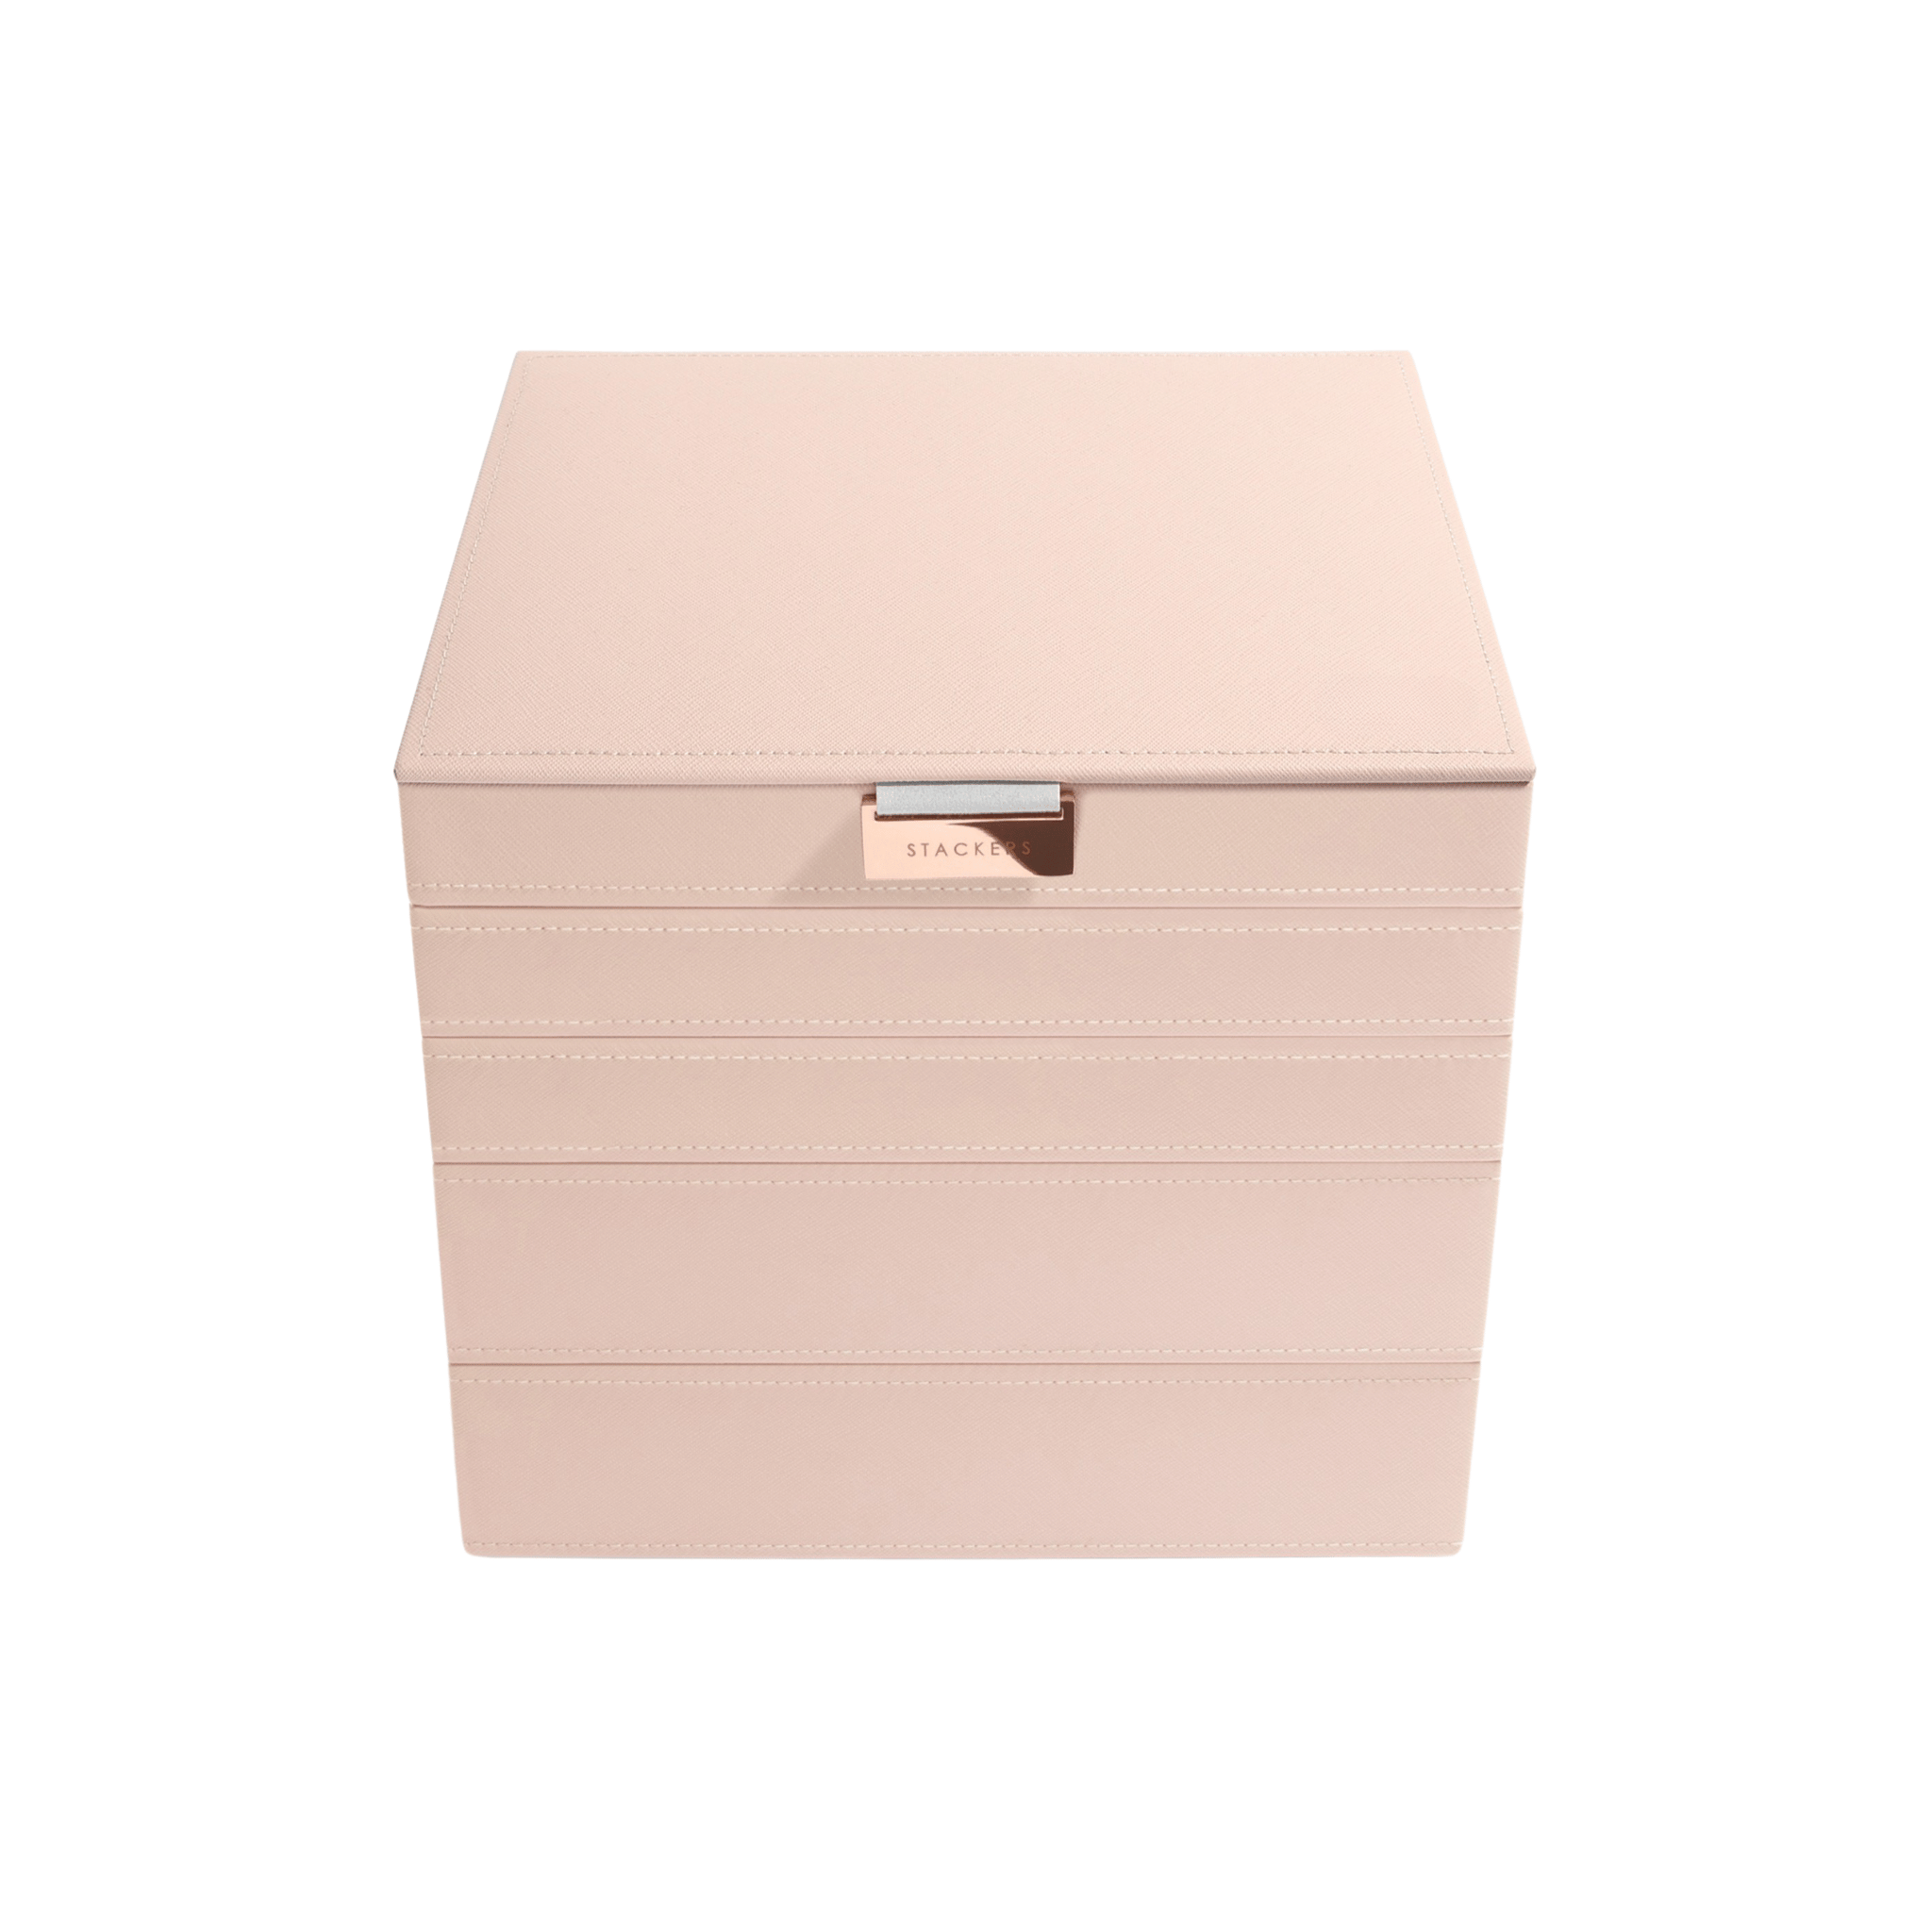 STACKERS Classic Jewelry Box 5-Set in Blush Pink - STACKERS BOX